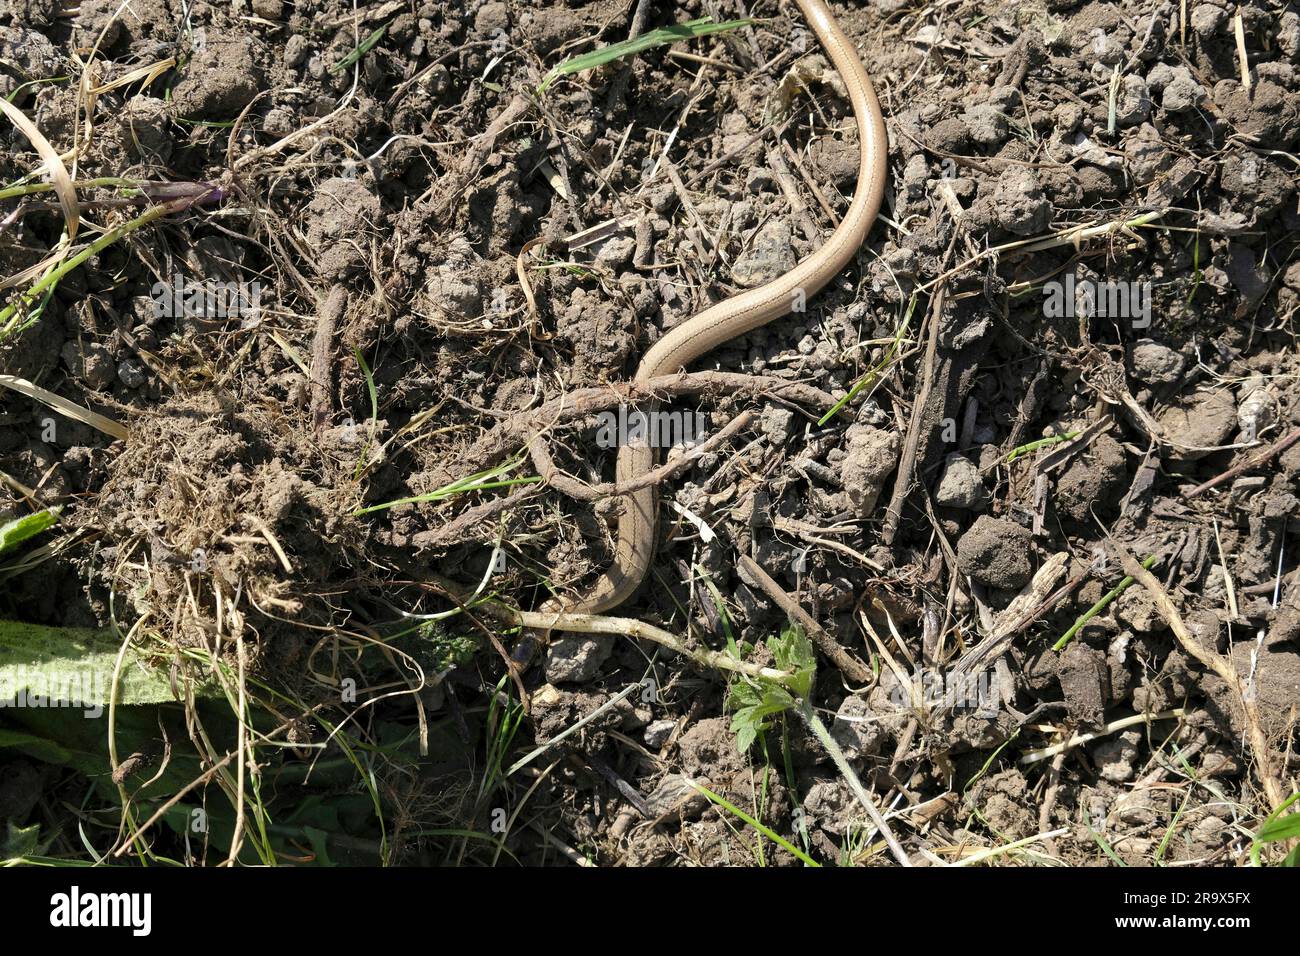 Slow worm burrowing into compost heap Stock Photo